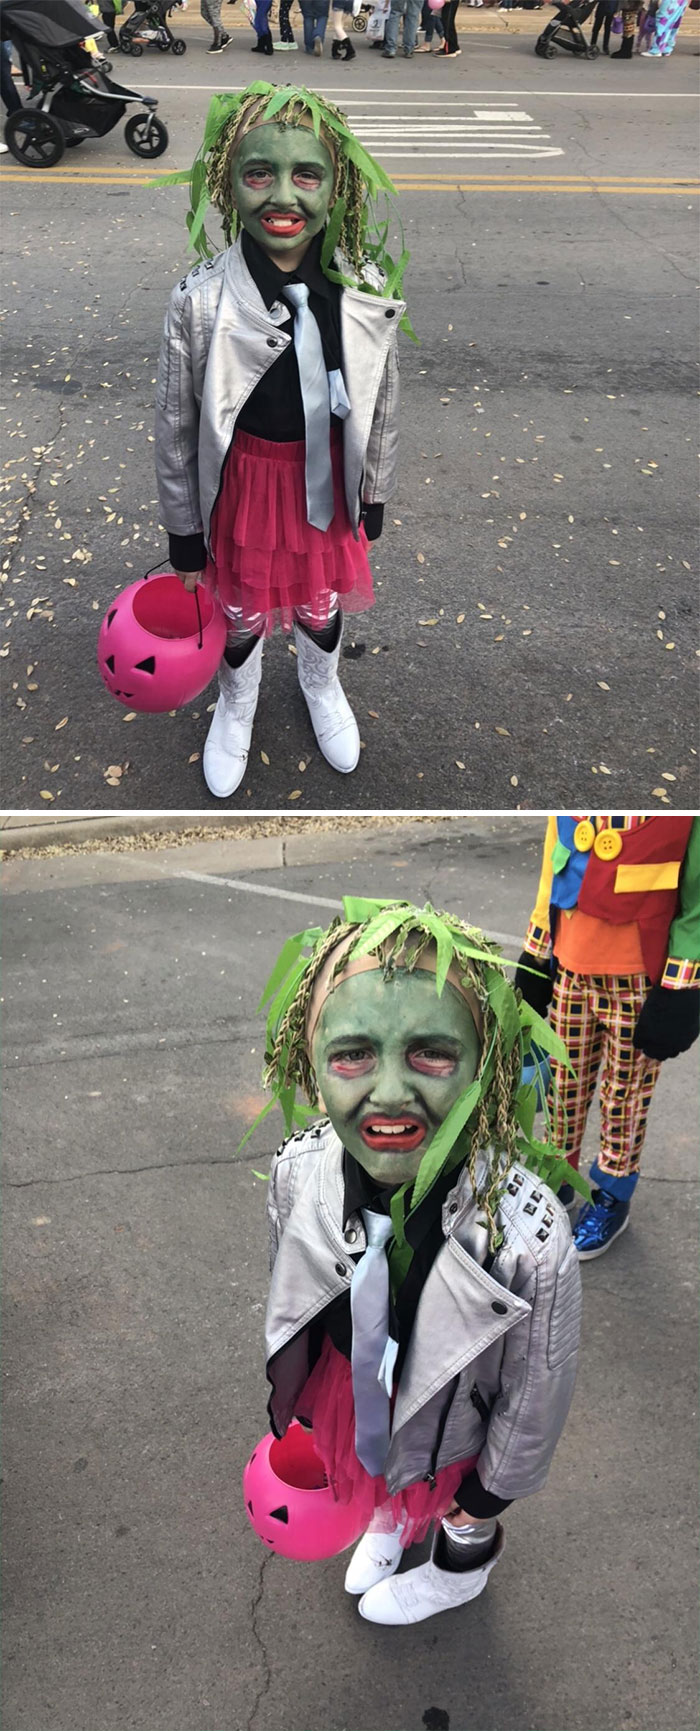 My Son Wanted To Be Old Gregg So I Assembled This Costume And Made The Wig From Fake Seaweed And A Wig Cap